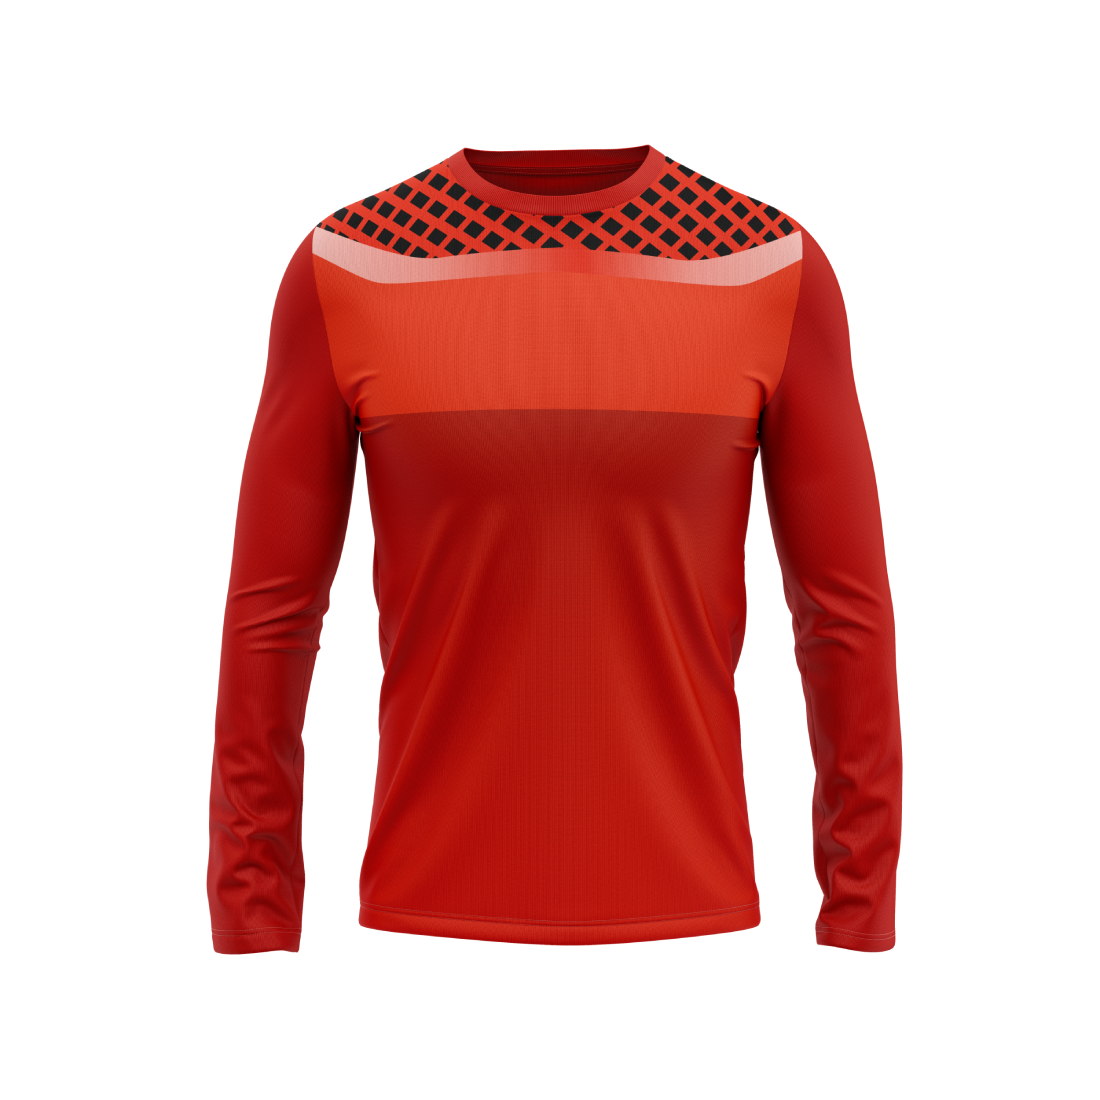 Round Neck Fullsleeve Printed Jersey Red NP5000036